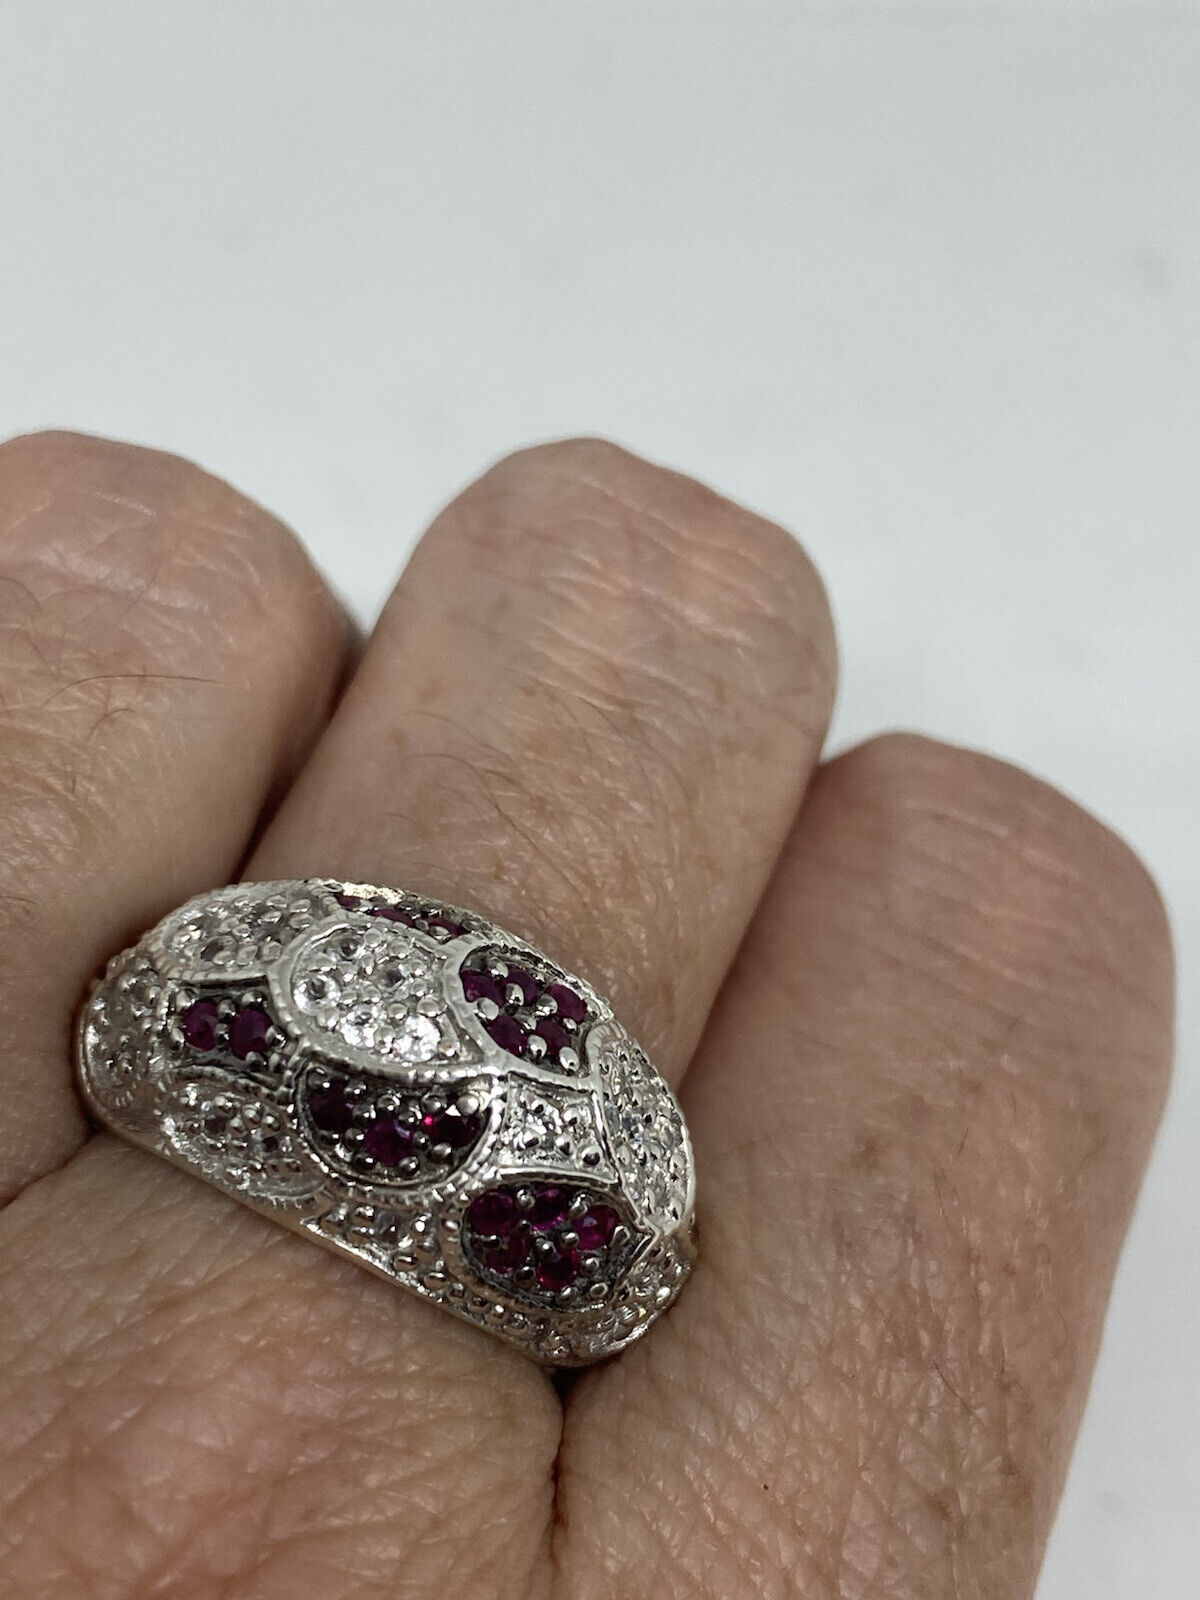 Vintage Red Ruby White Sapphire 925 Sterling Silver Ring Size 8 Natychmiastowa dostawa w Japonii